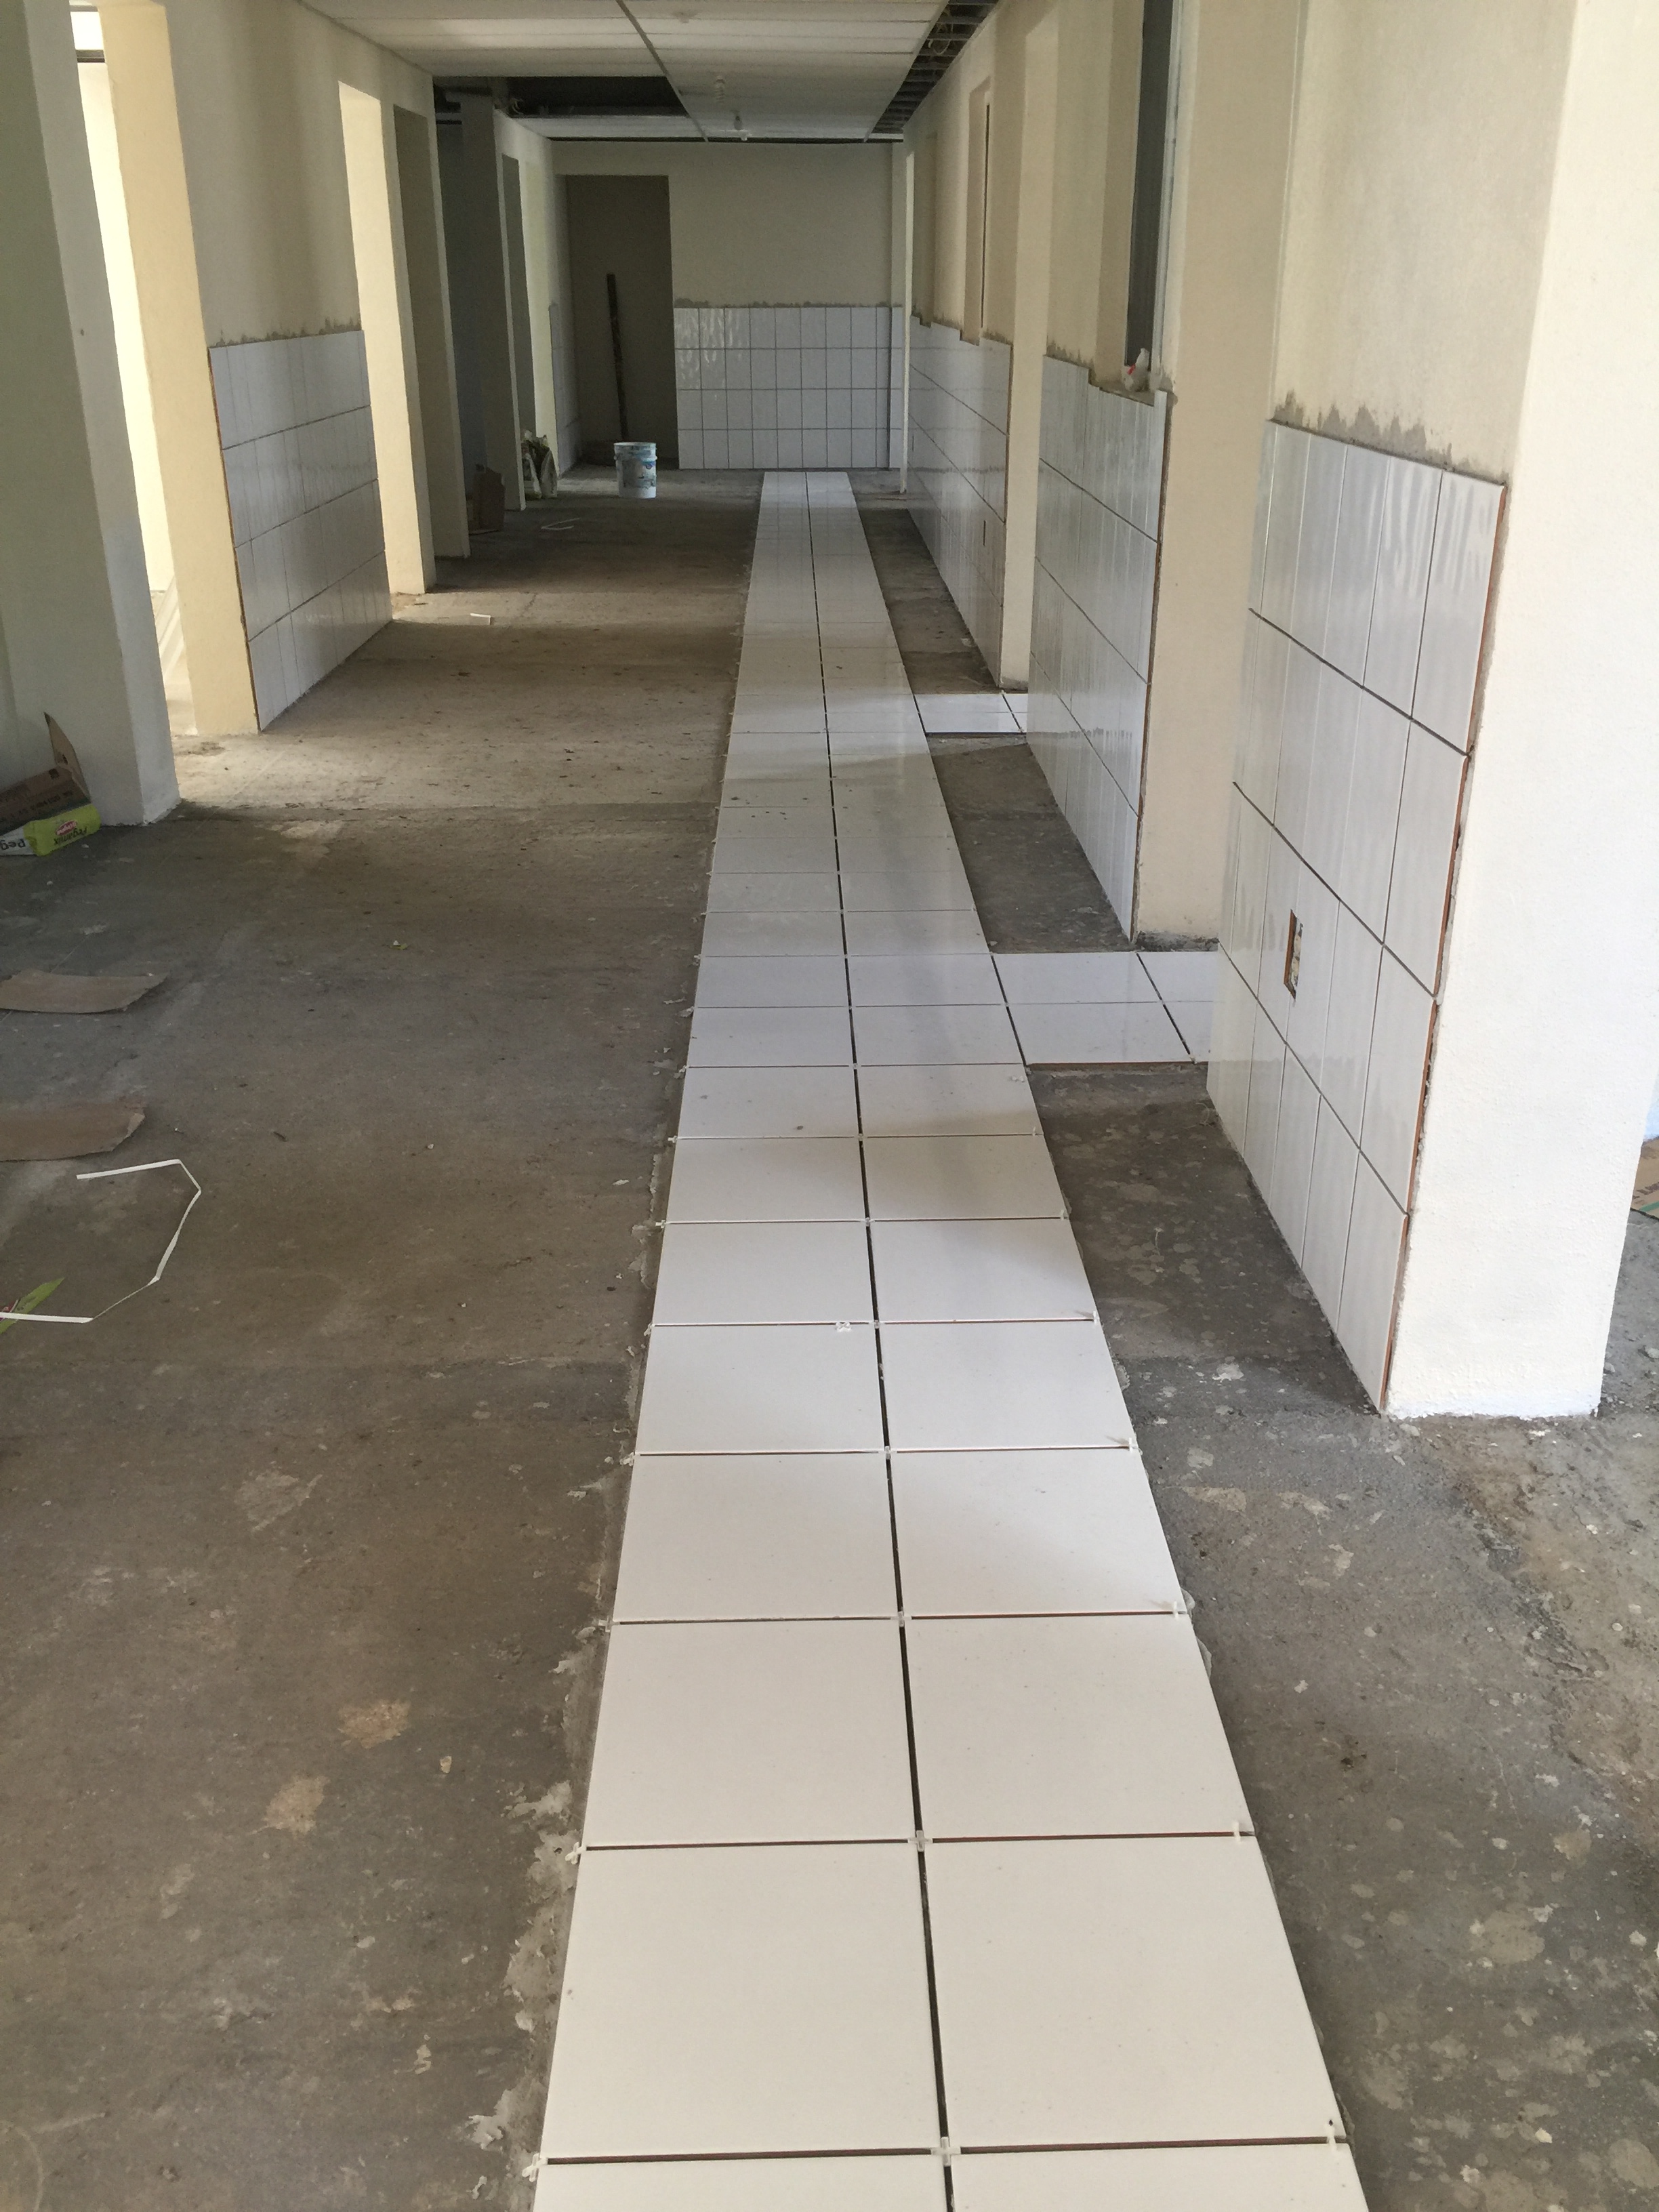 Hospital tile being laid